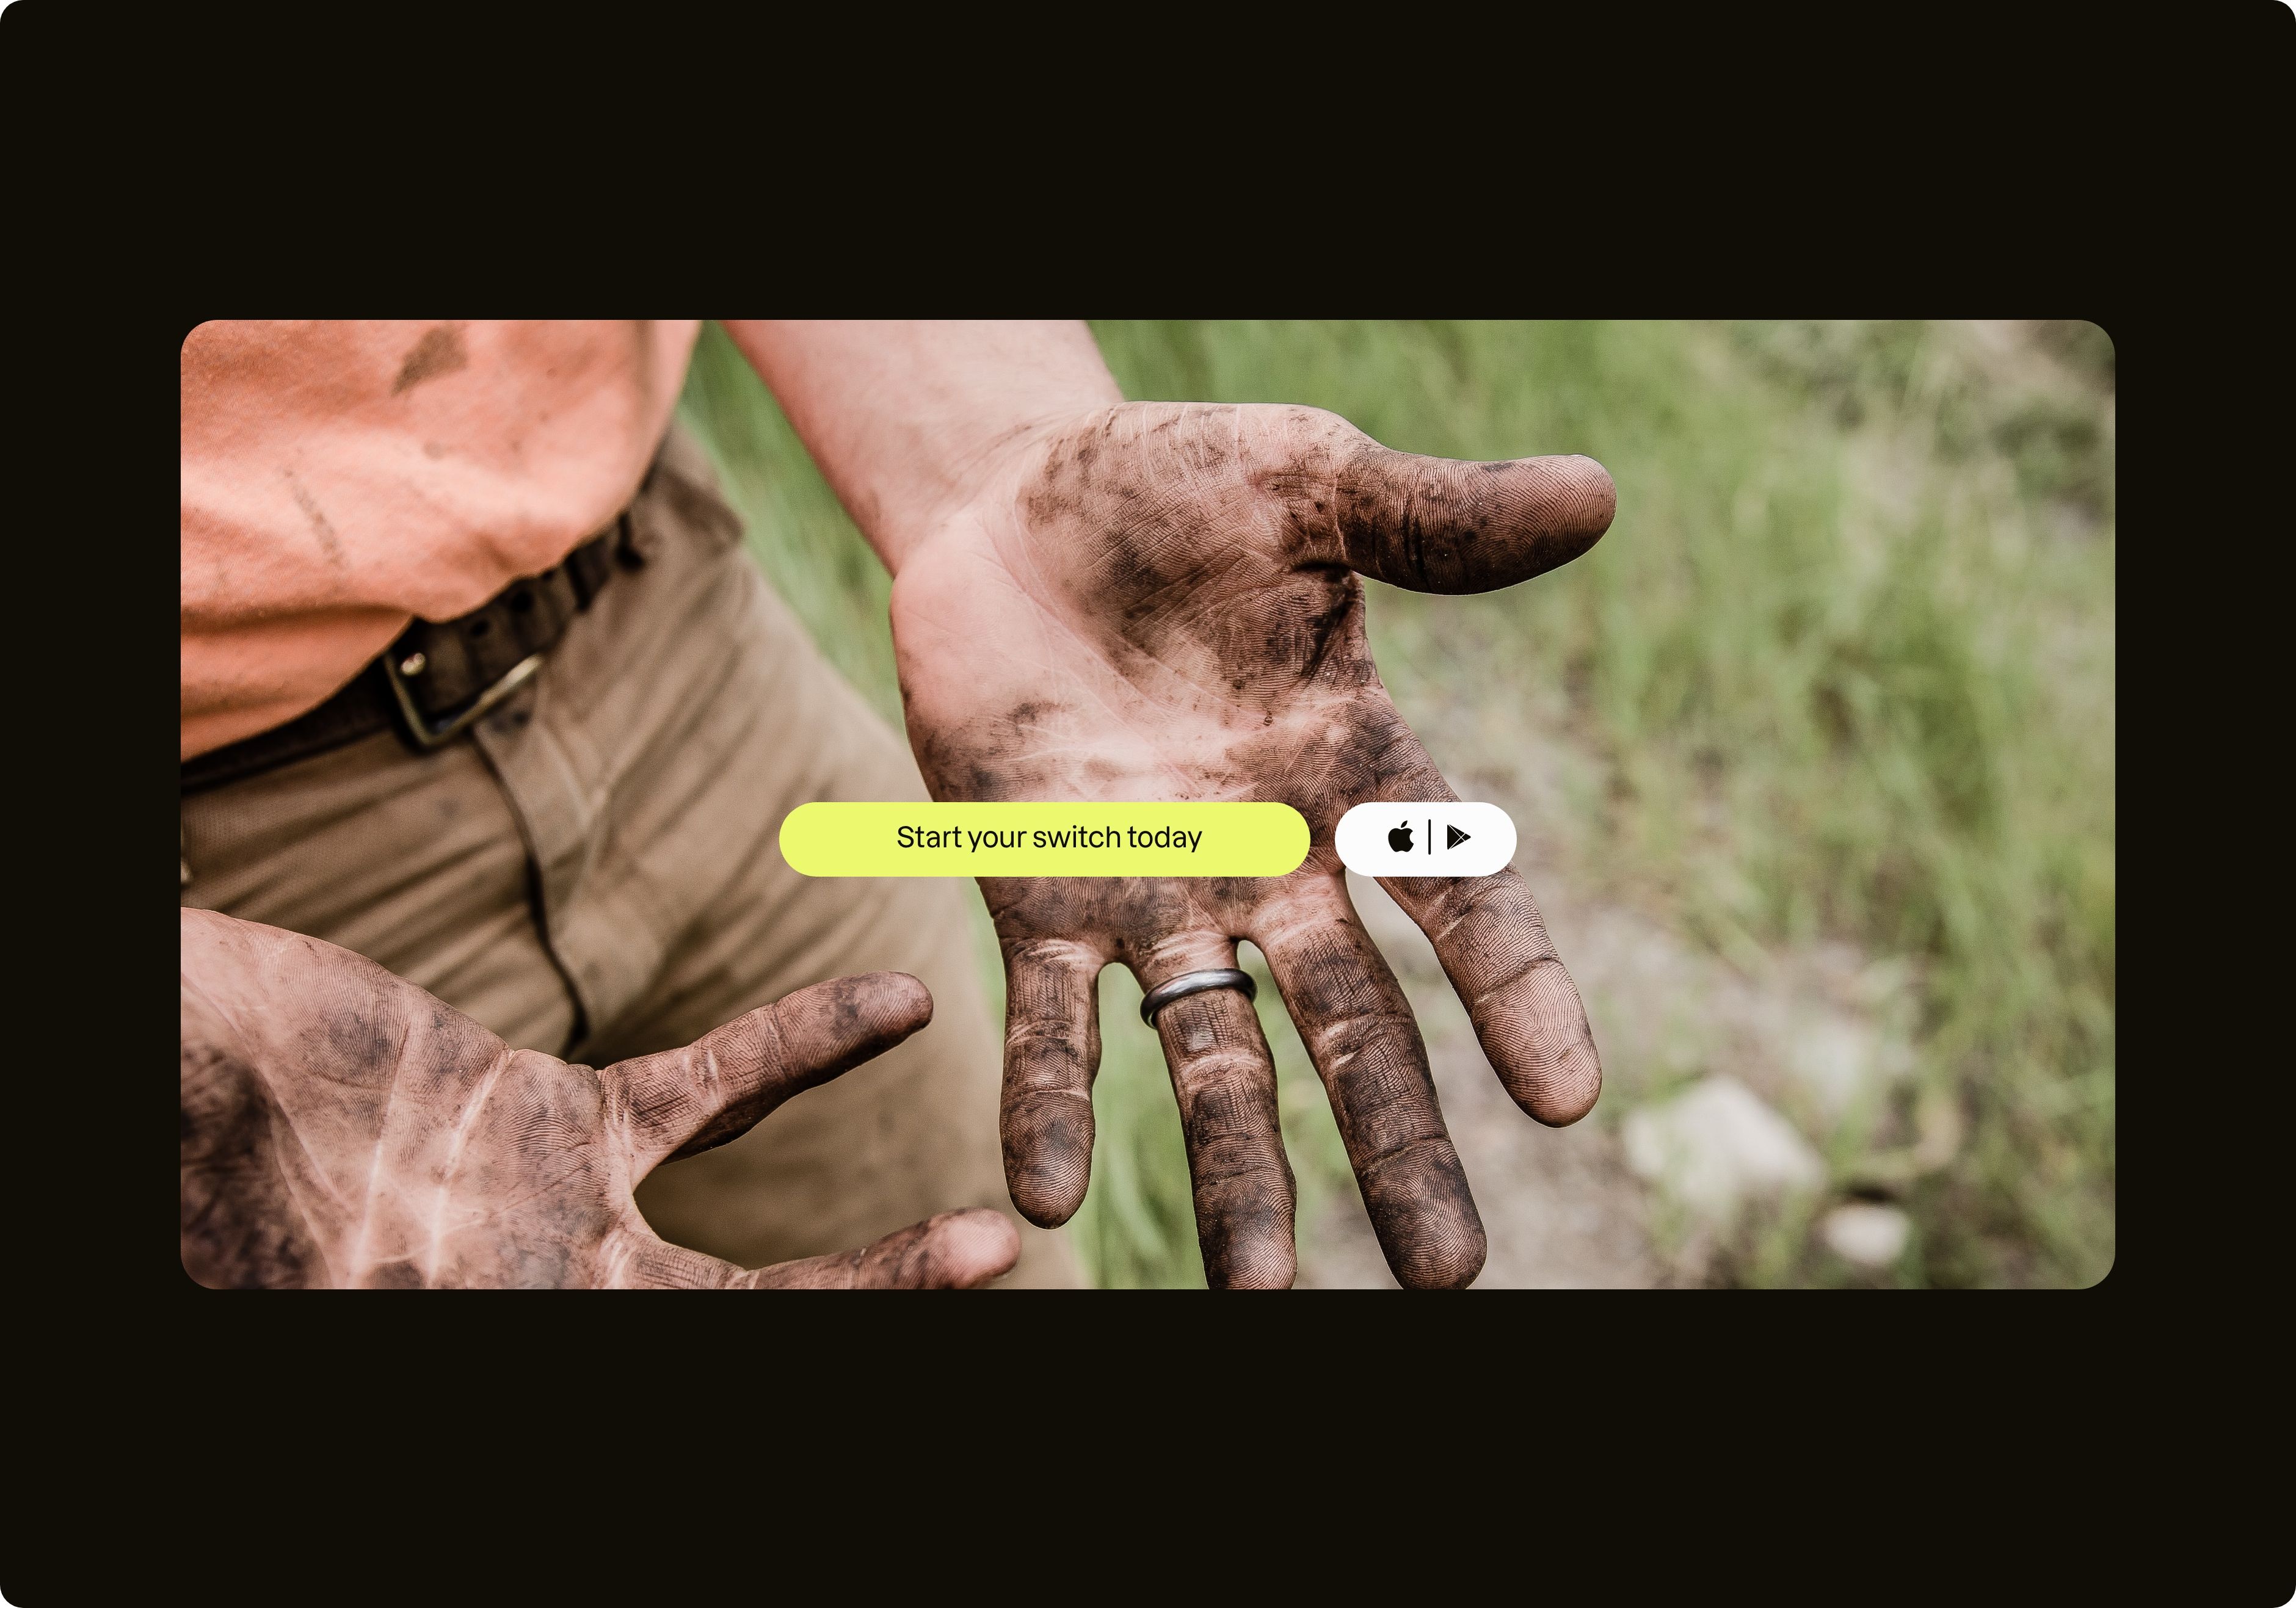 Photograph of farmer showing muddy hands.